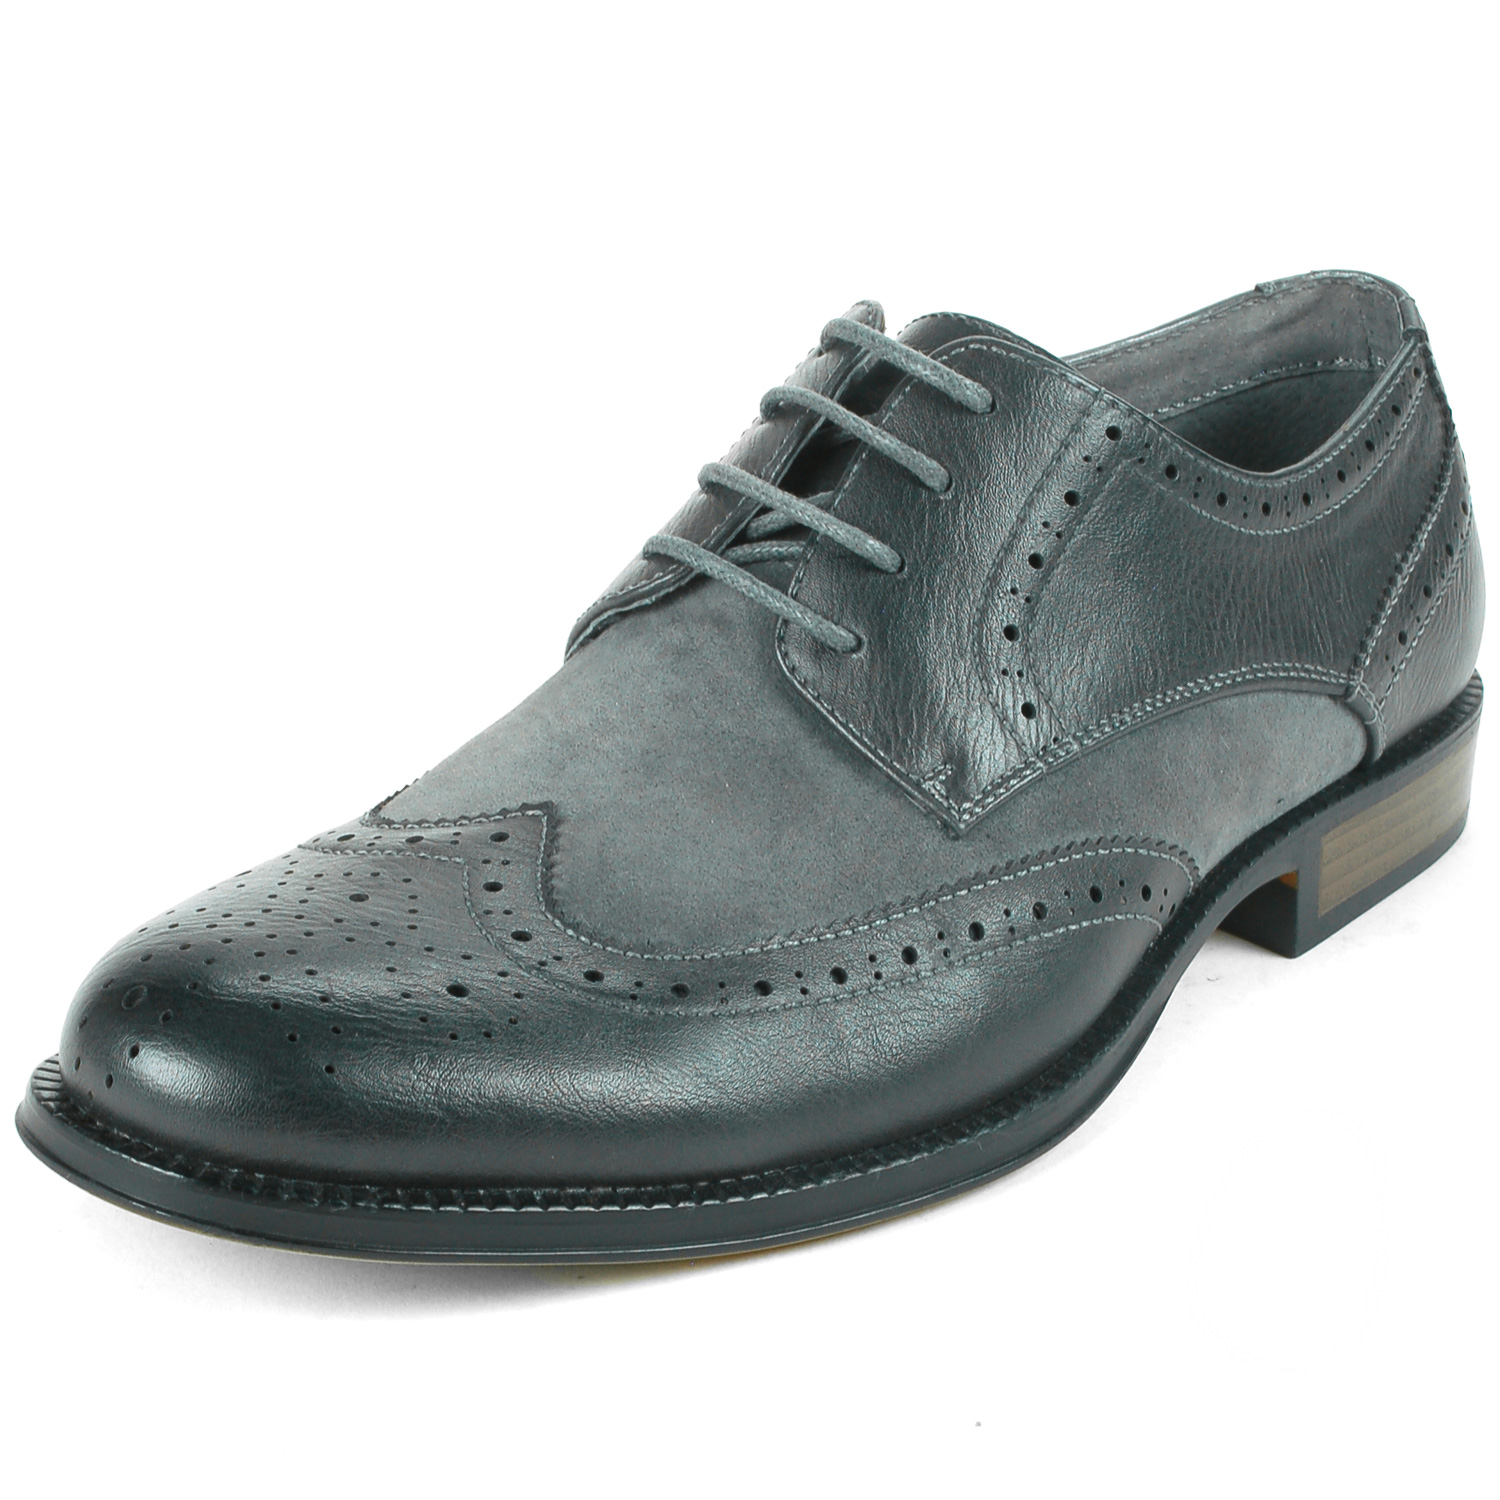 wing tip dress shoes